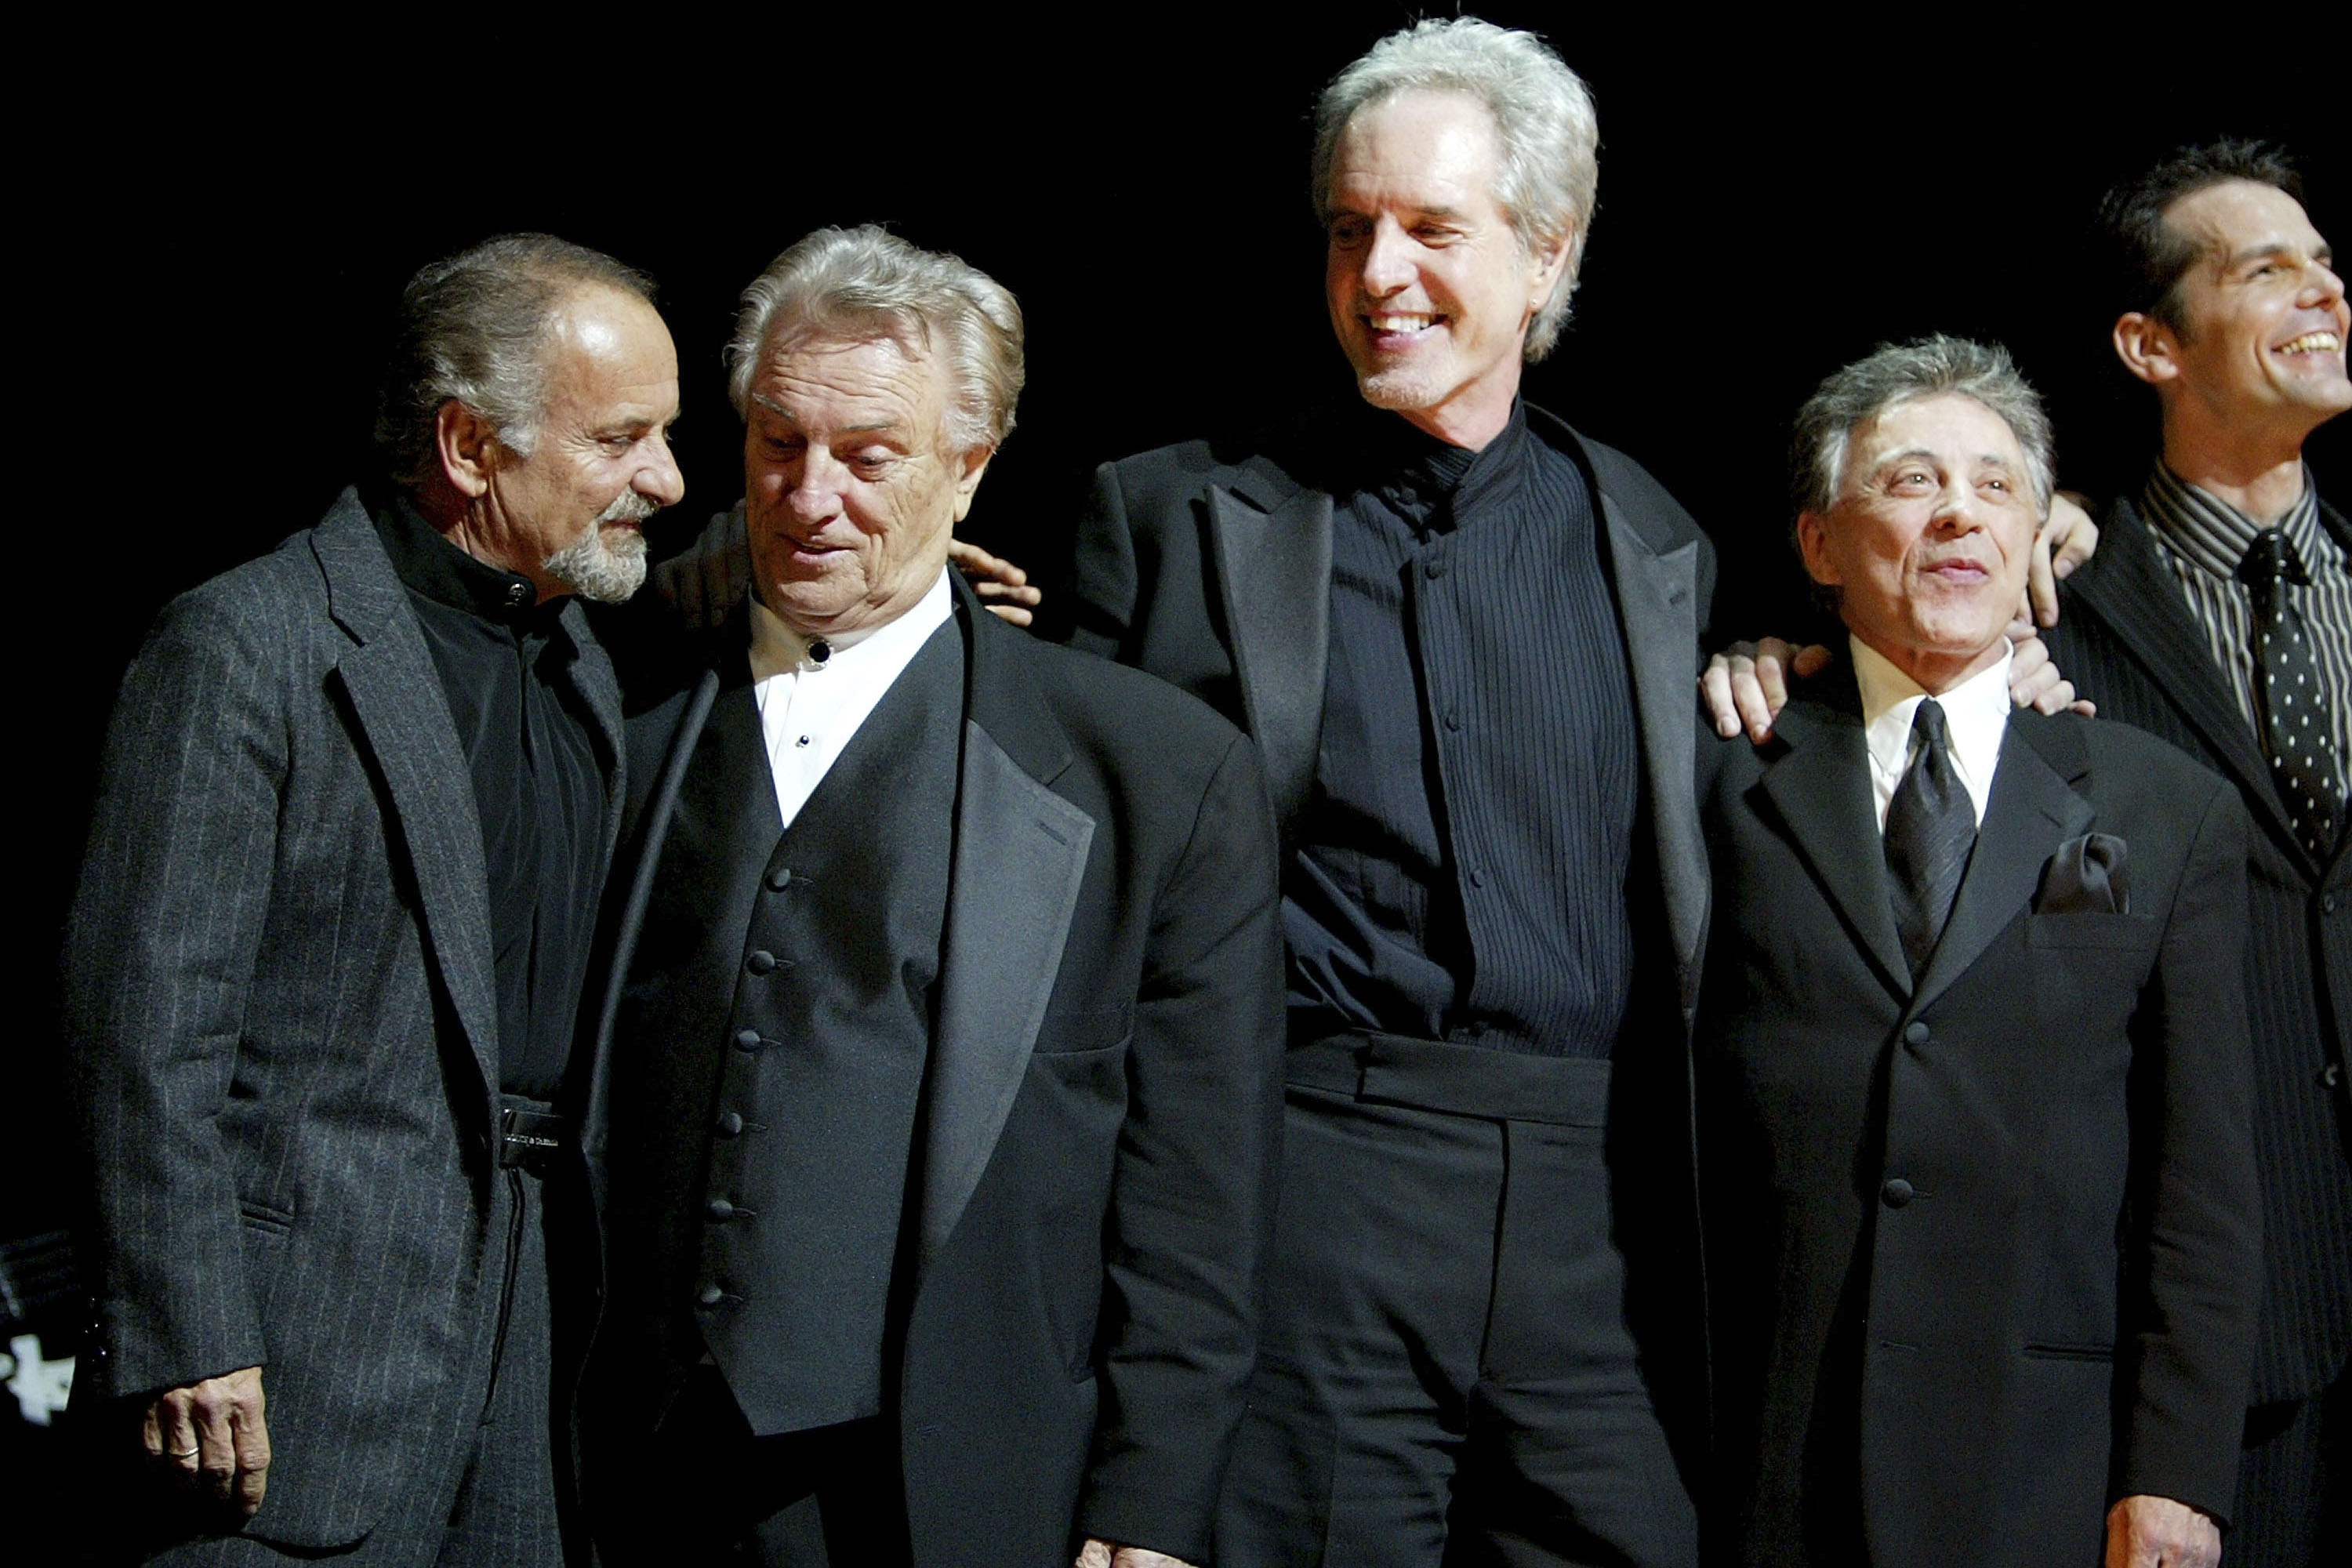 Opening Of "Jersey Boys" - Joe Pesci with Frankie Valli and The Four Seasons